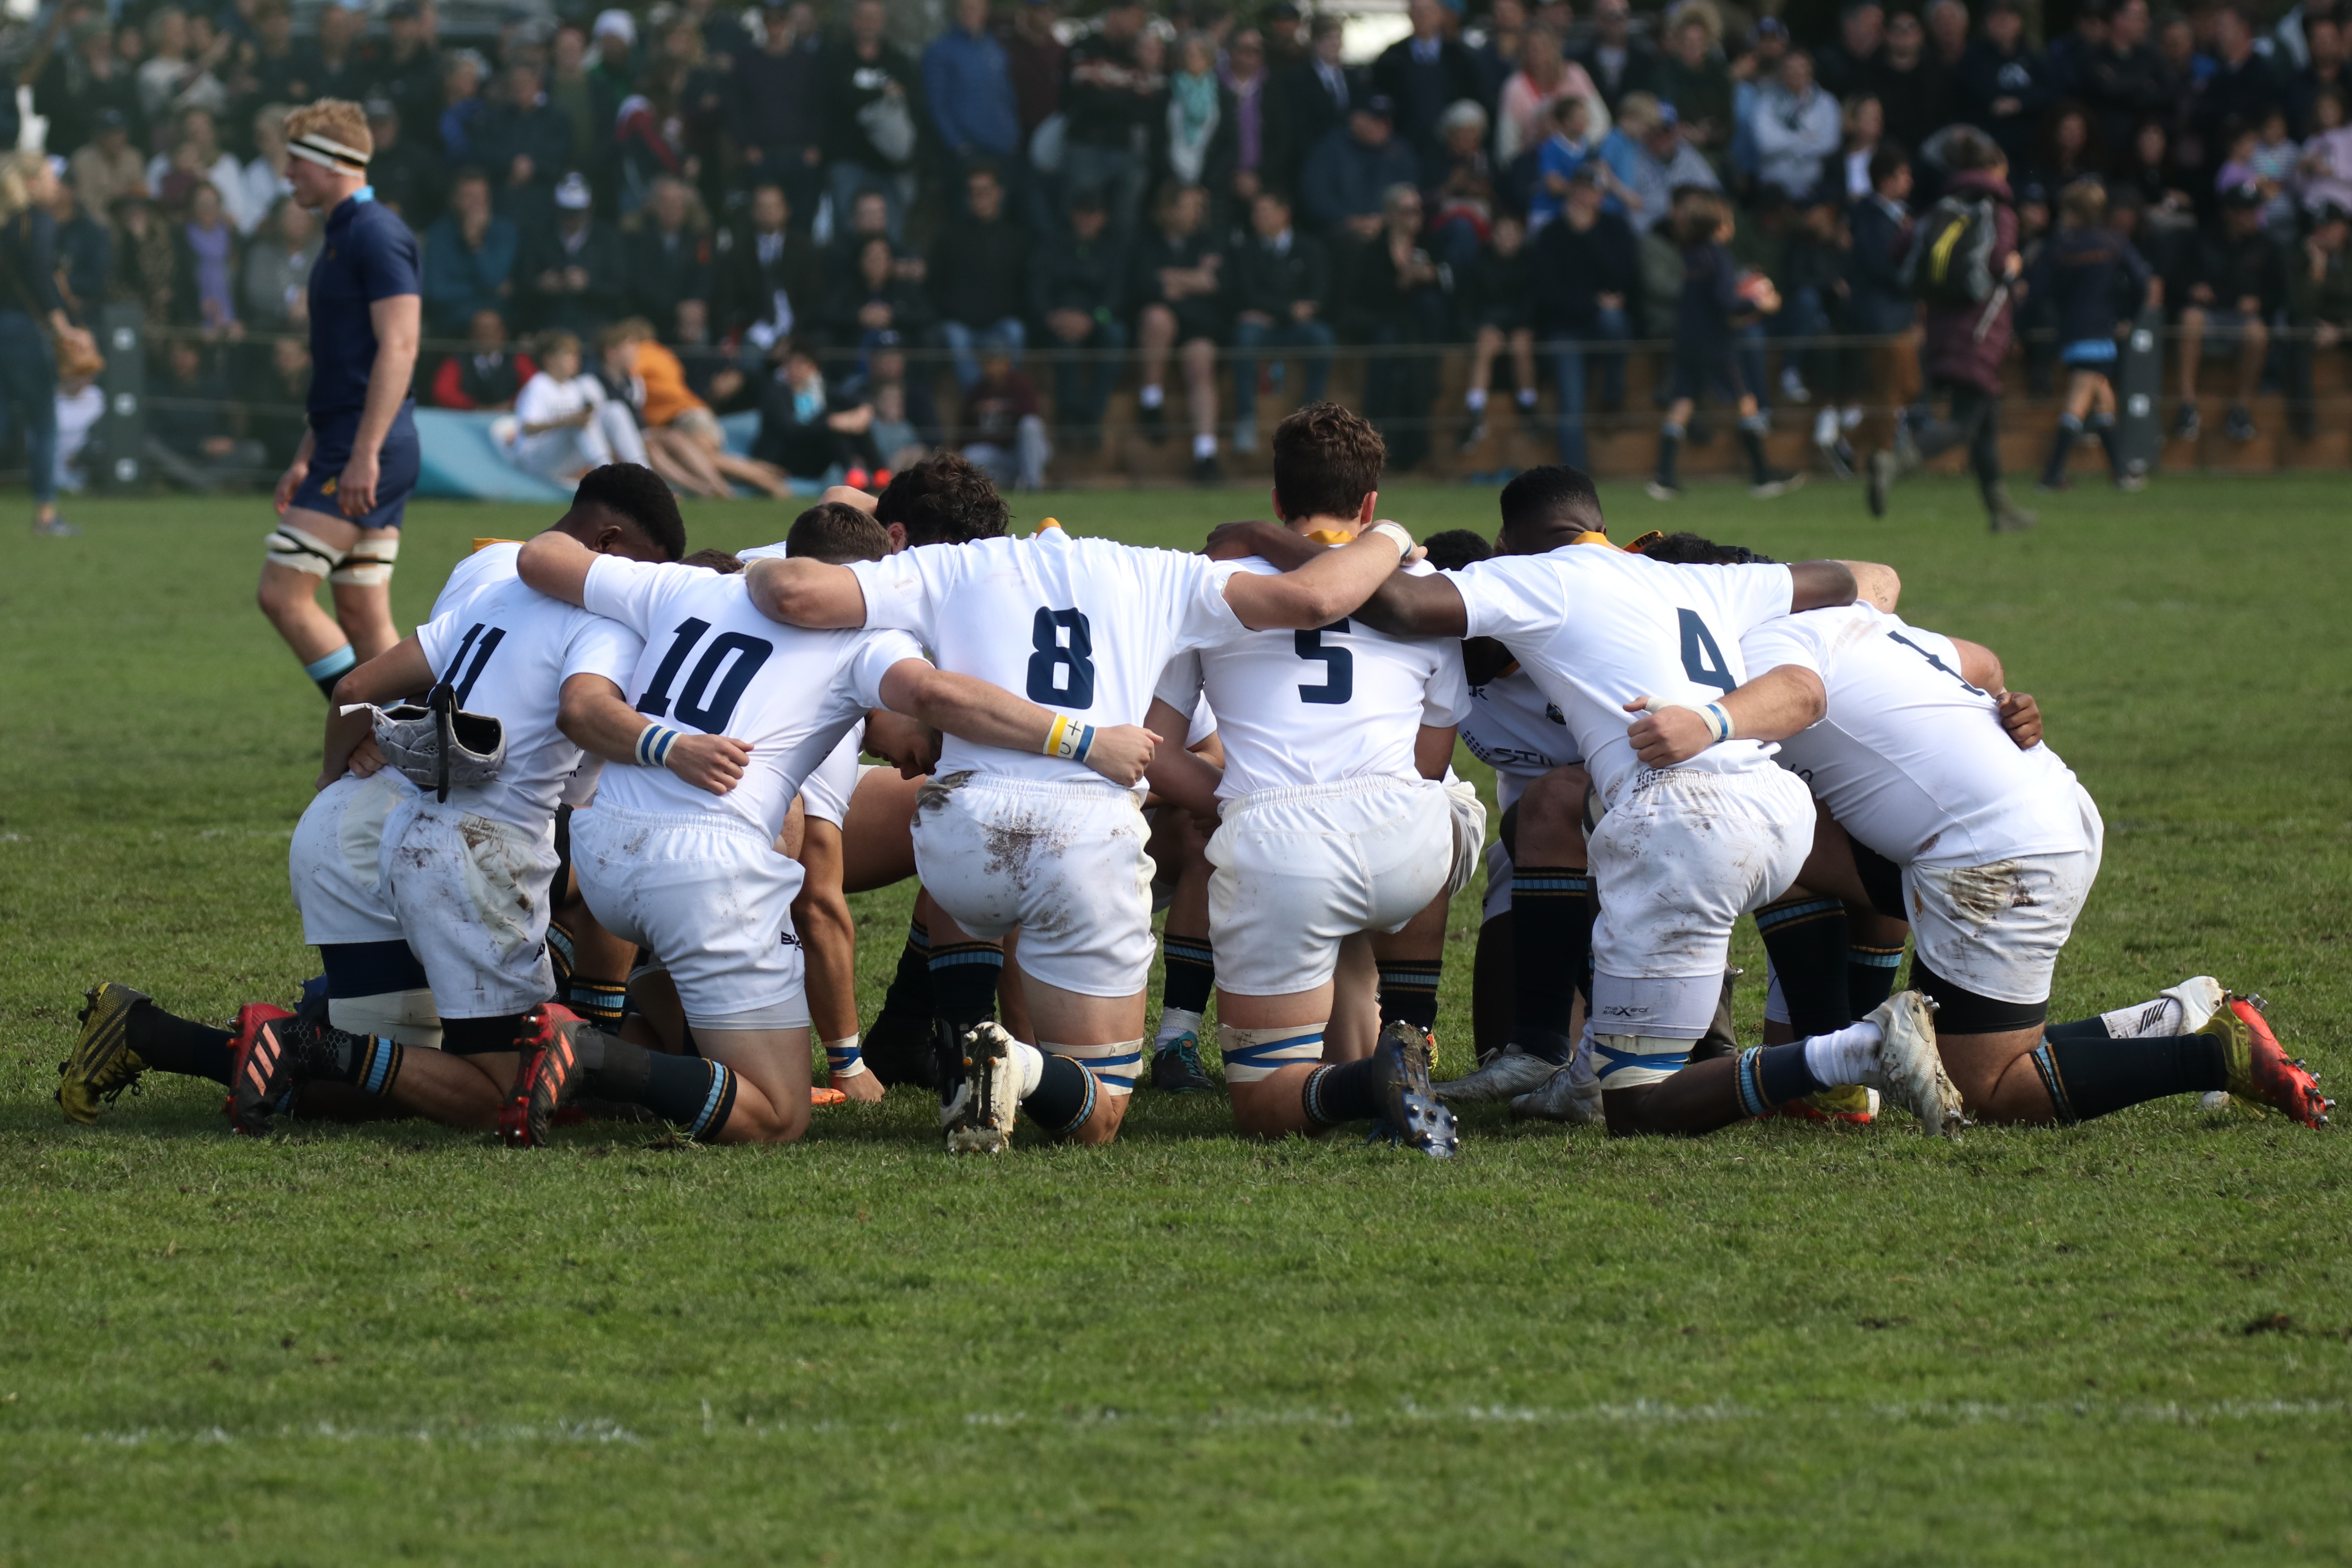 Rondebosch Boys First XV gather in a huddle